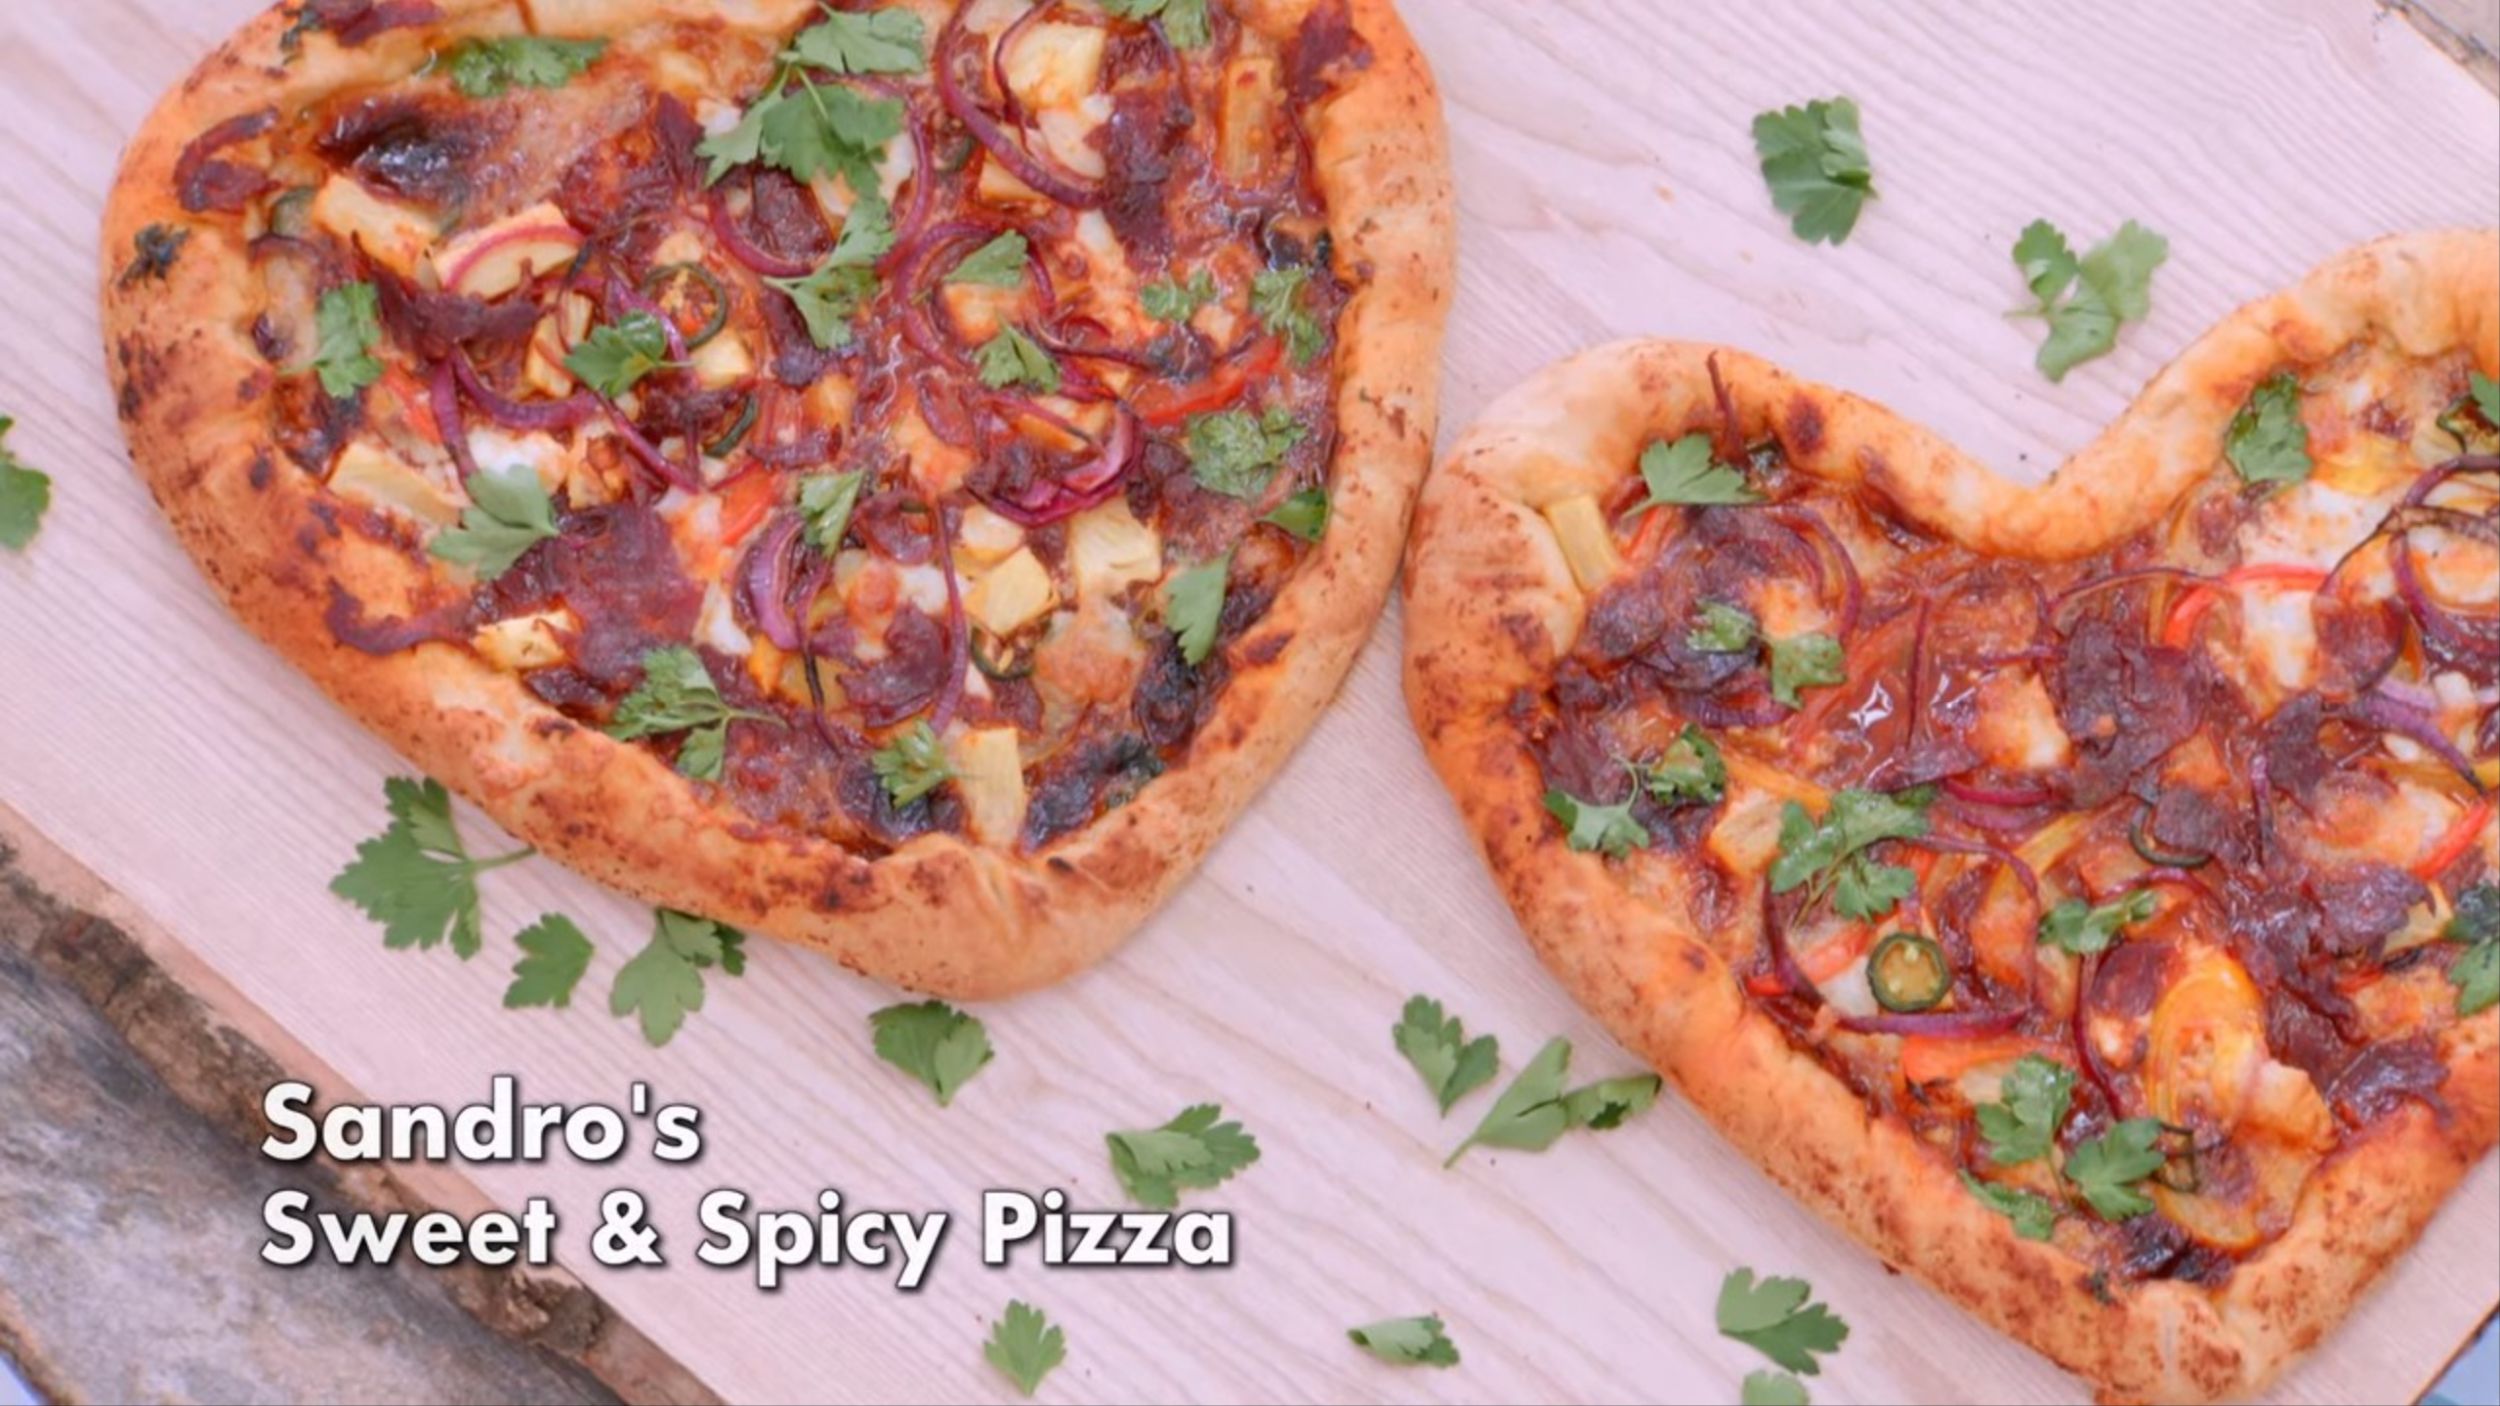 Picture shows: Sandro's Sweet & Spicy Pizzas Signature for The Great British Baking Show Season 10's Bread Week